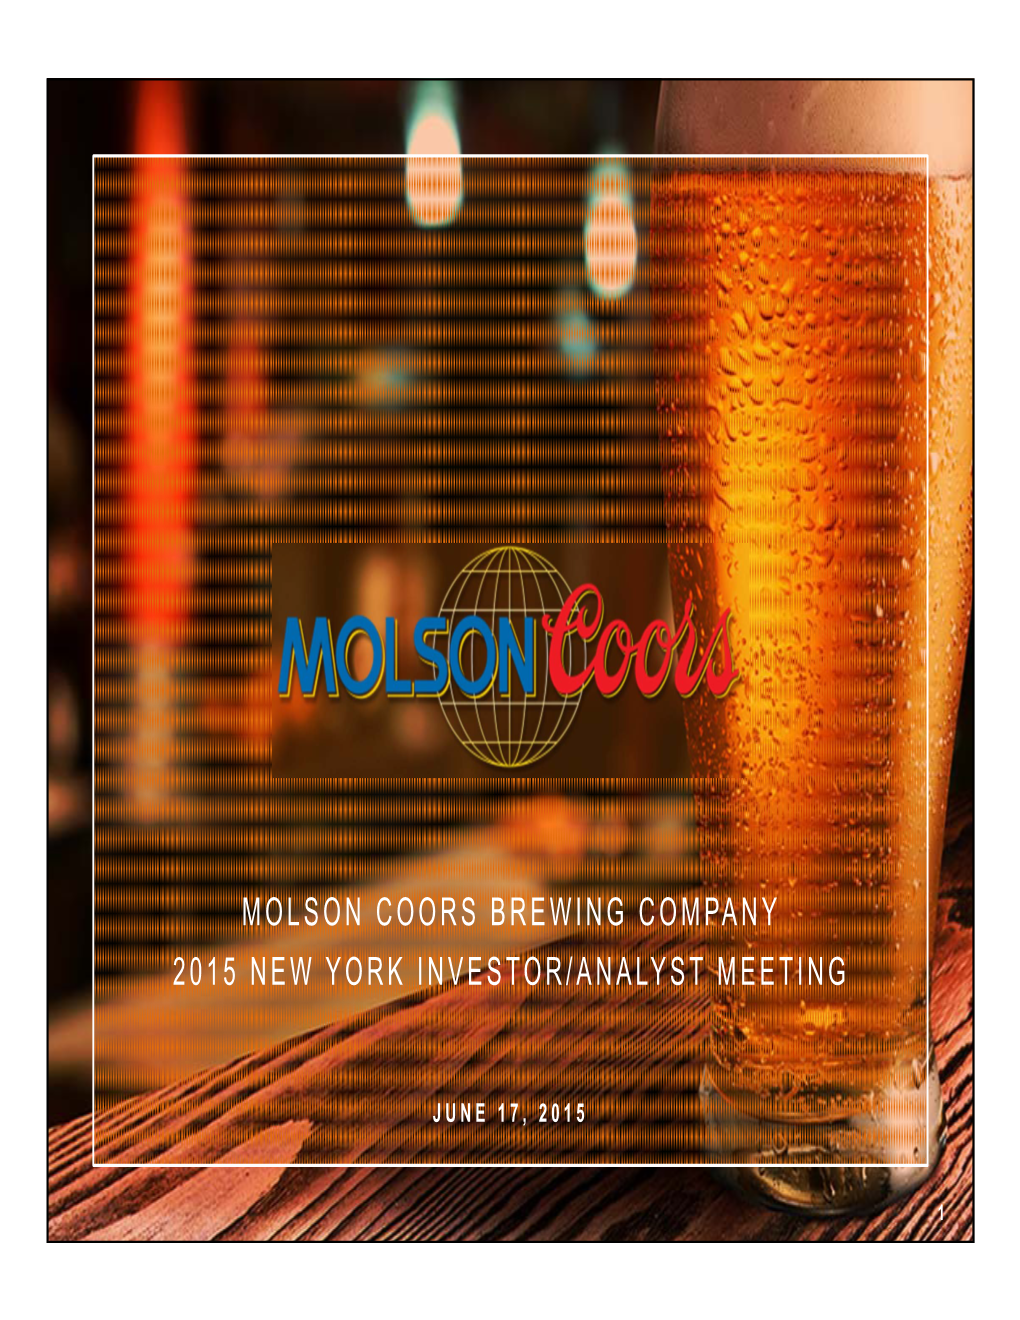 Molson Coors Brewing Company 2015 New York Investor/Analyst Meeting